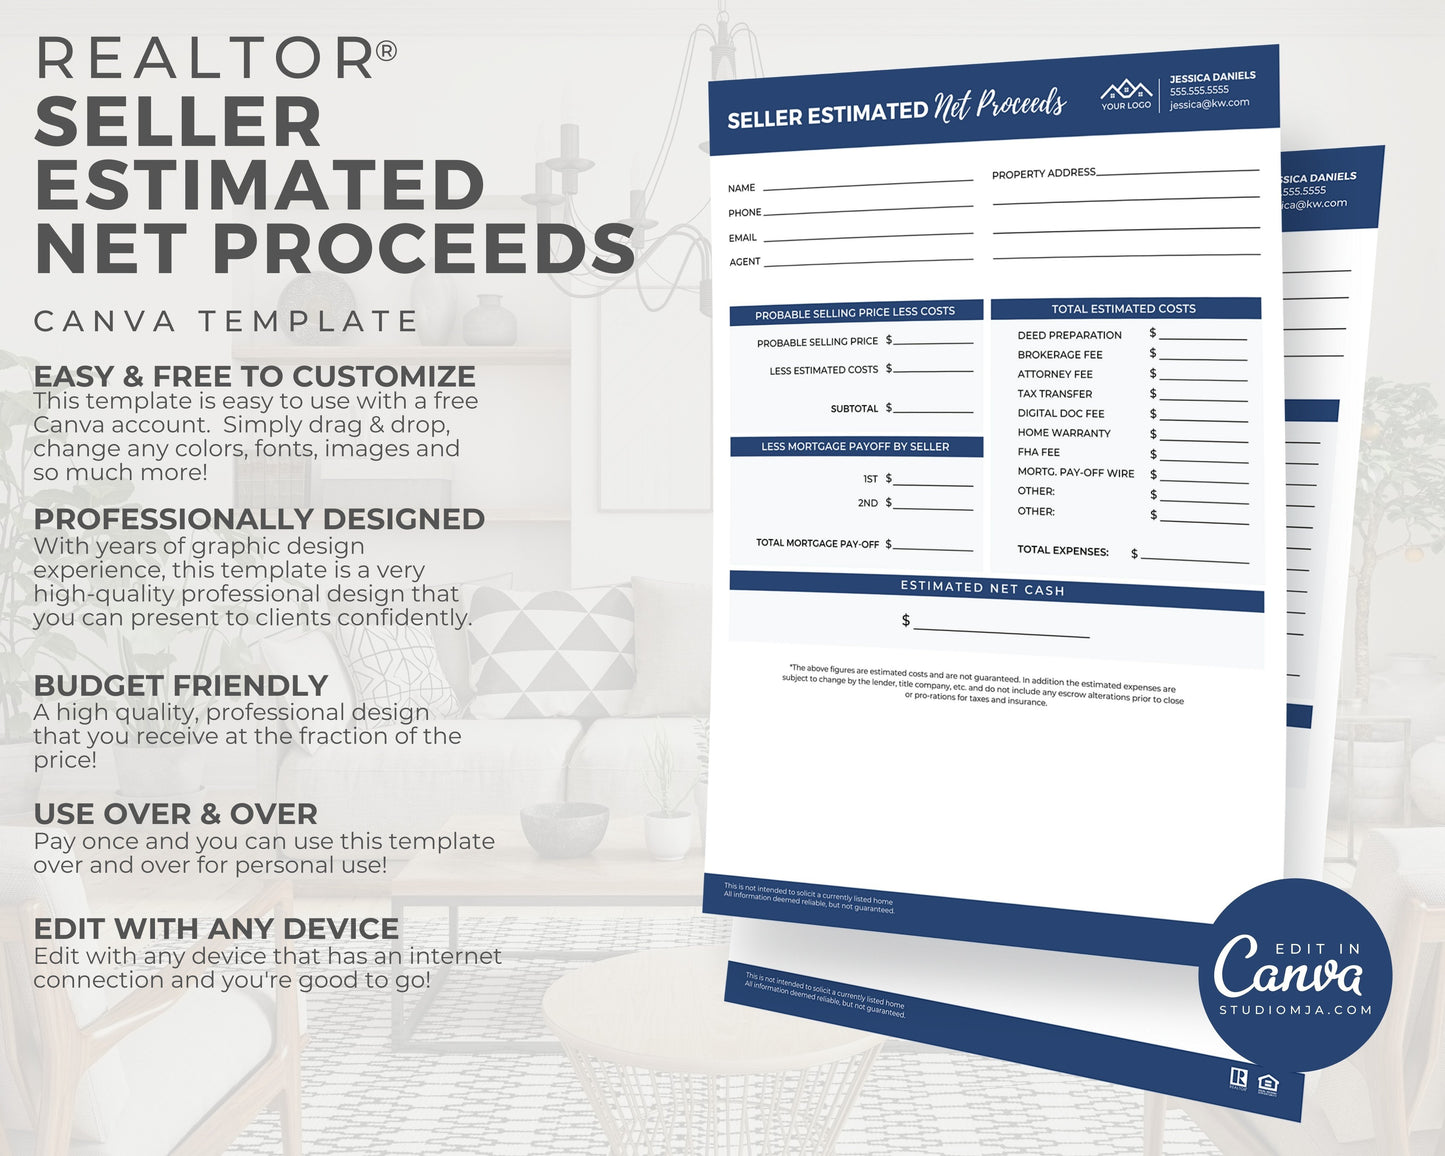 estimated net proceeds canva template for real estate agents.  A mockup featuring a blue and white form with black text and gray colored boxes.   Probable selling price less costs, total estimated costs, less mortgage payoff by seller, estimated net cash.